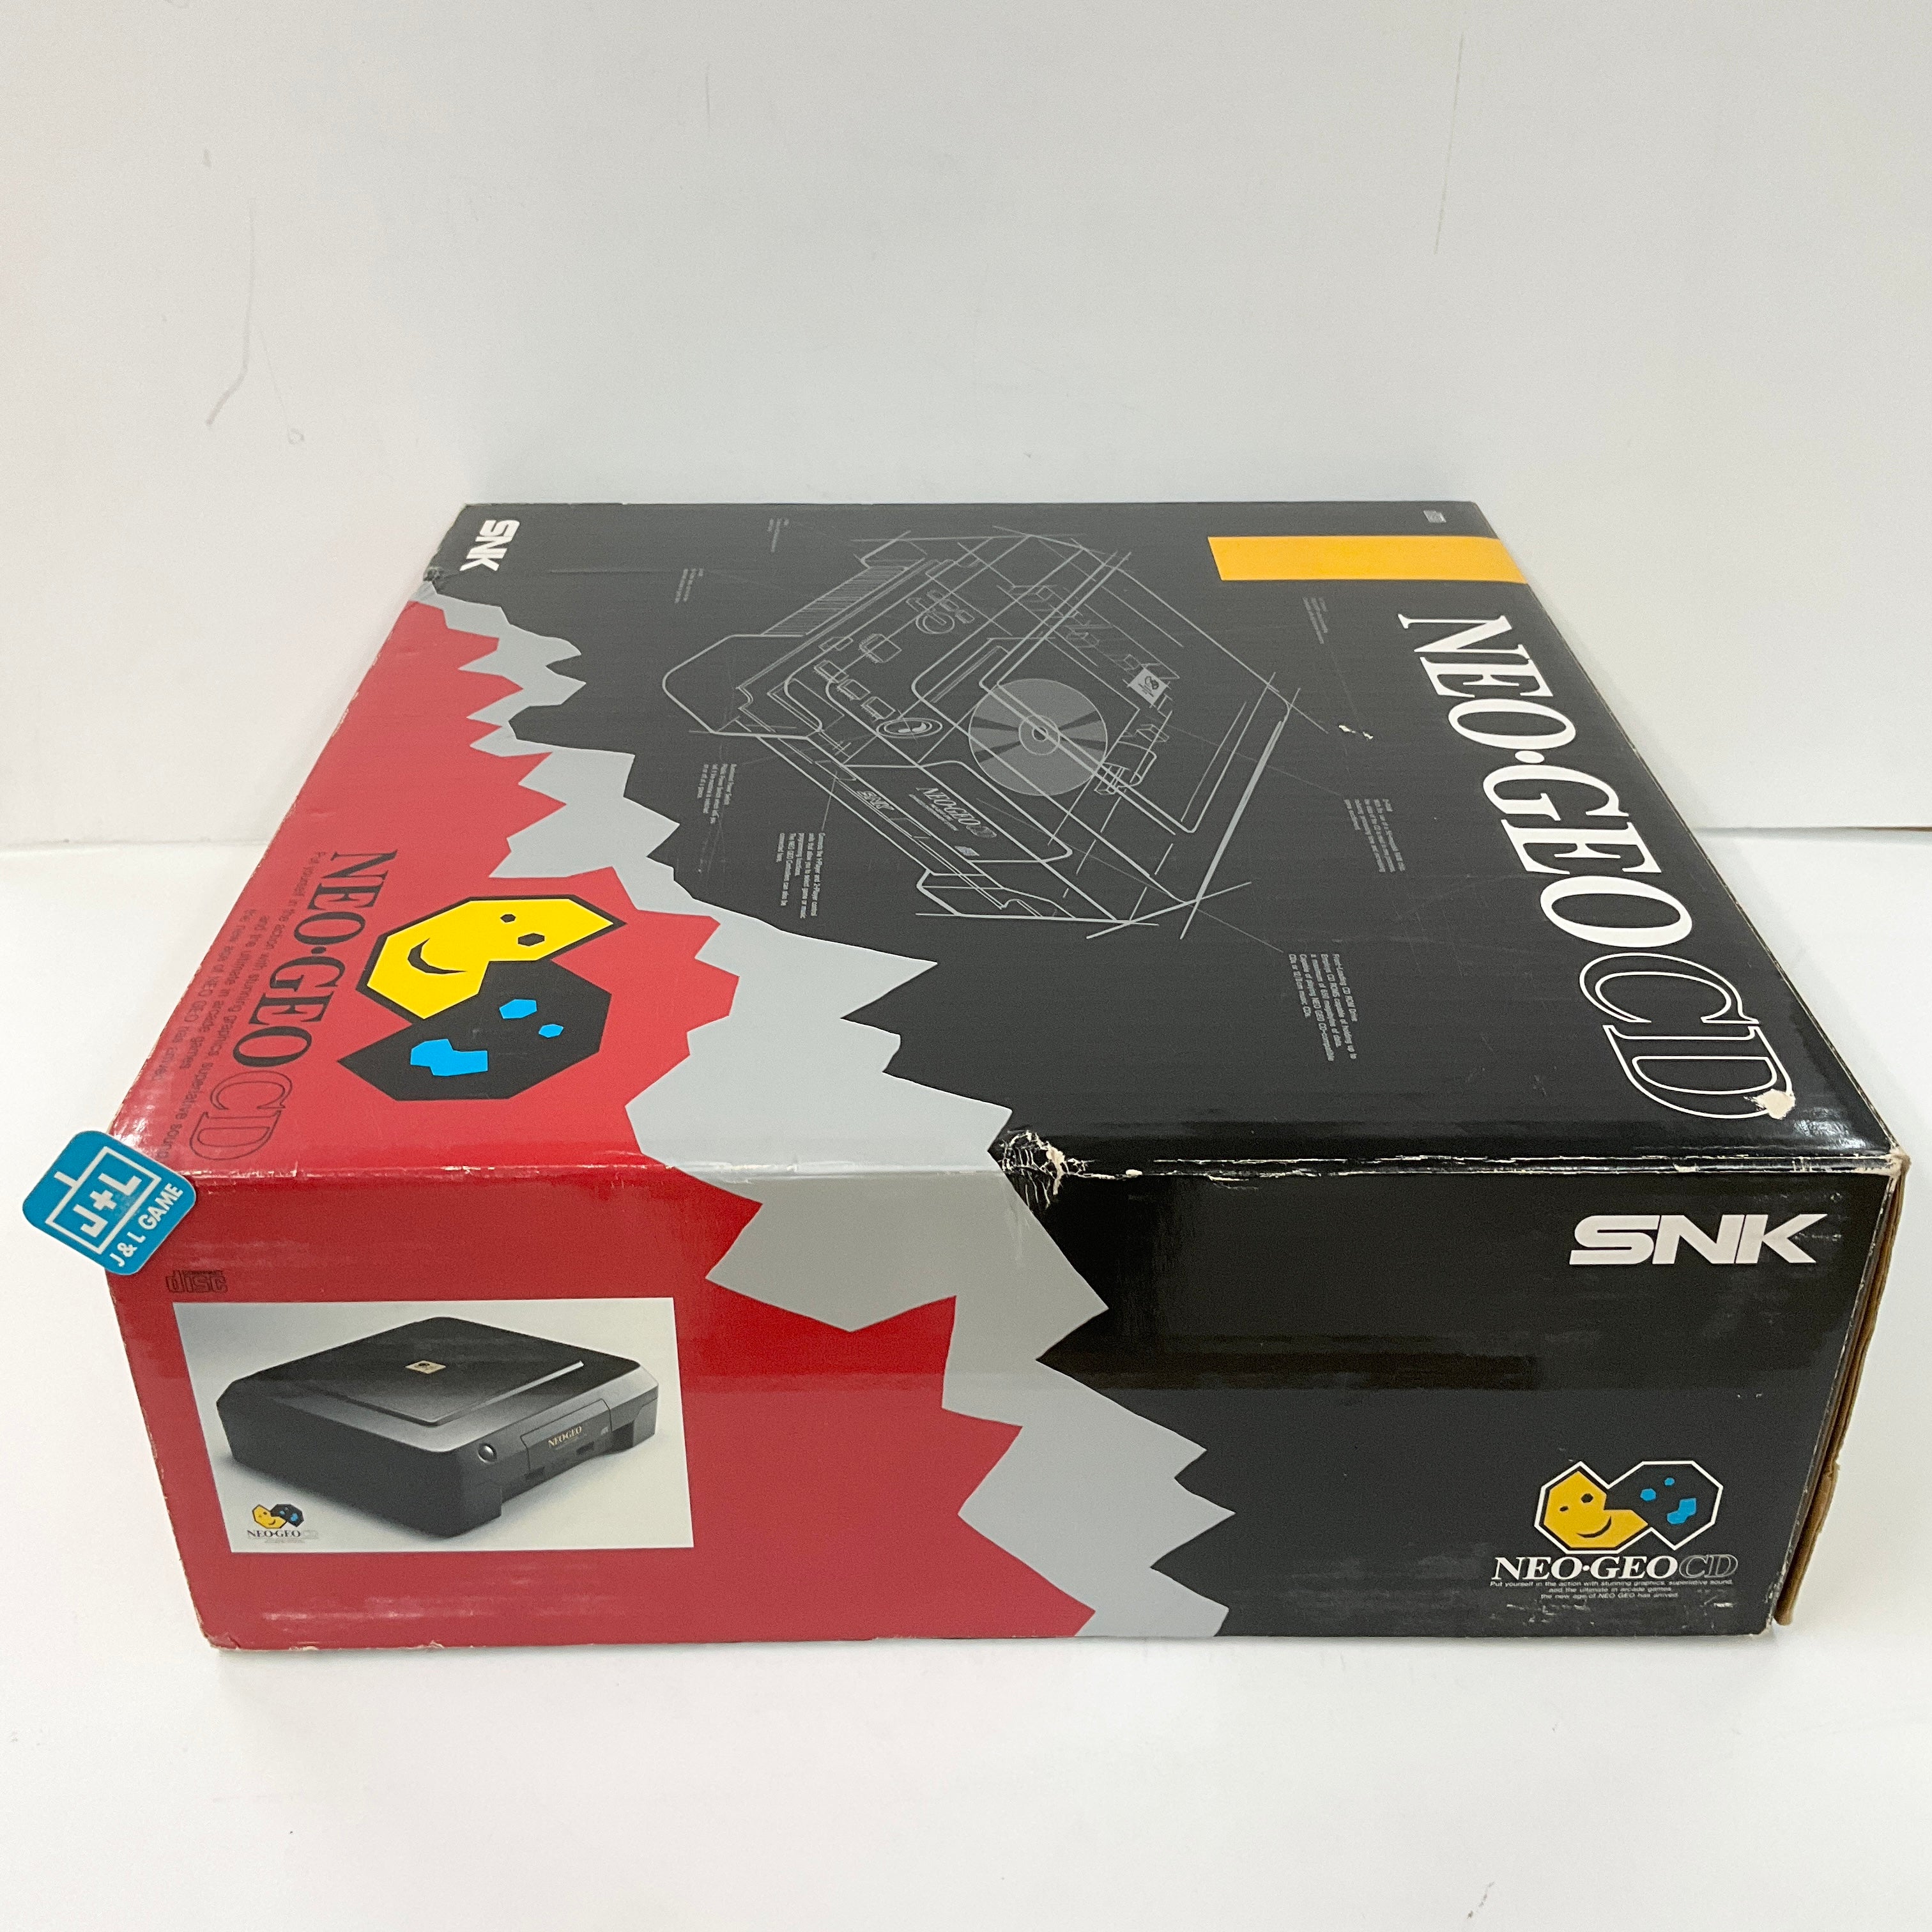 Neo Geo CD Front Loader Console - SNK NeoGeo CD [Pre-Owned] (Japanese  Import)